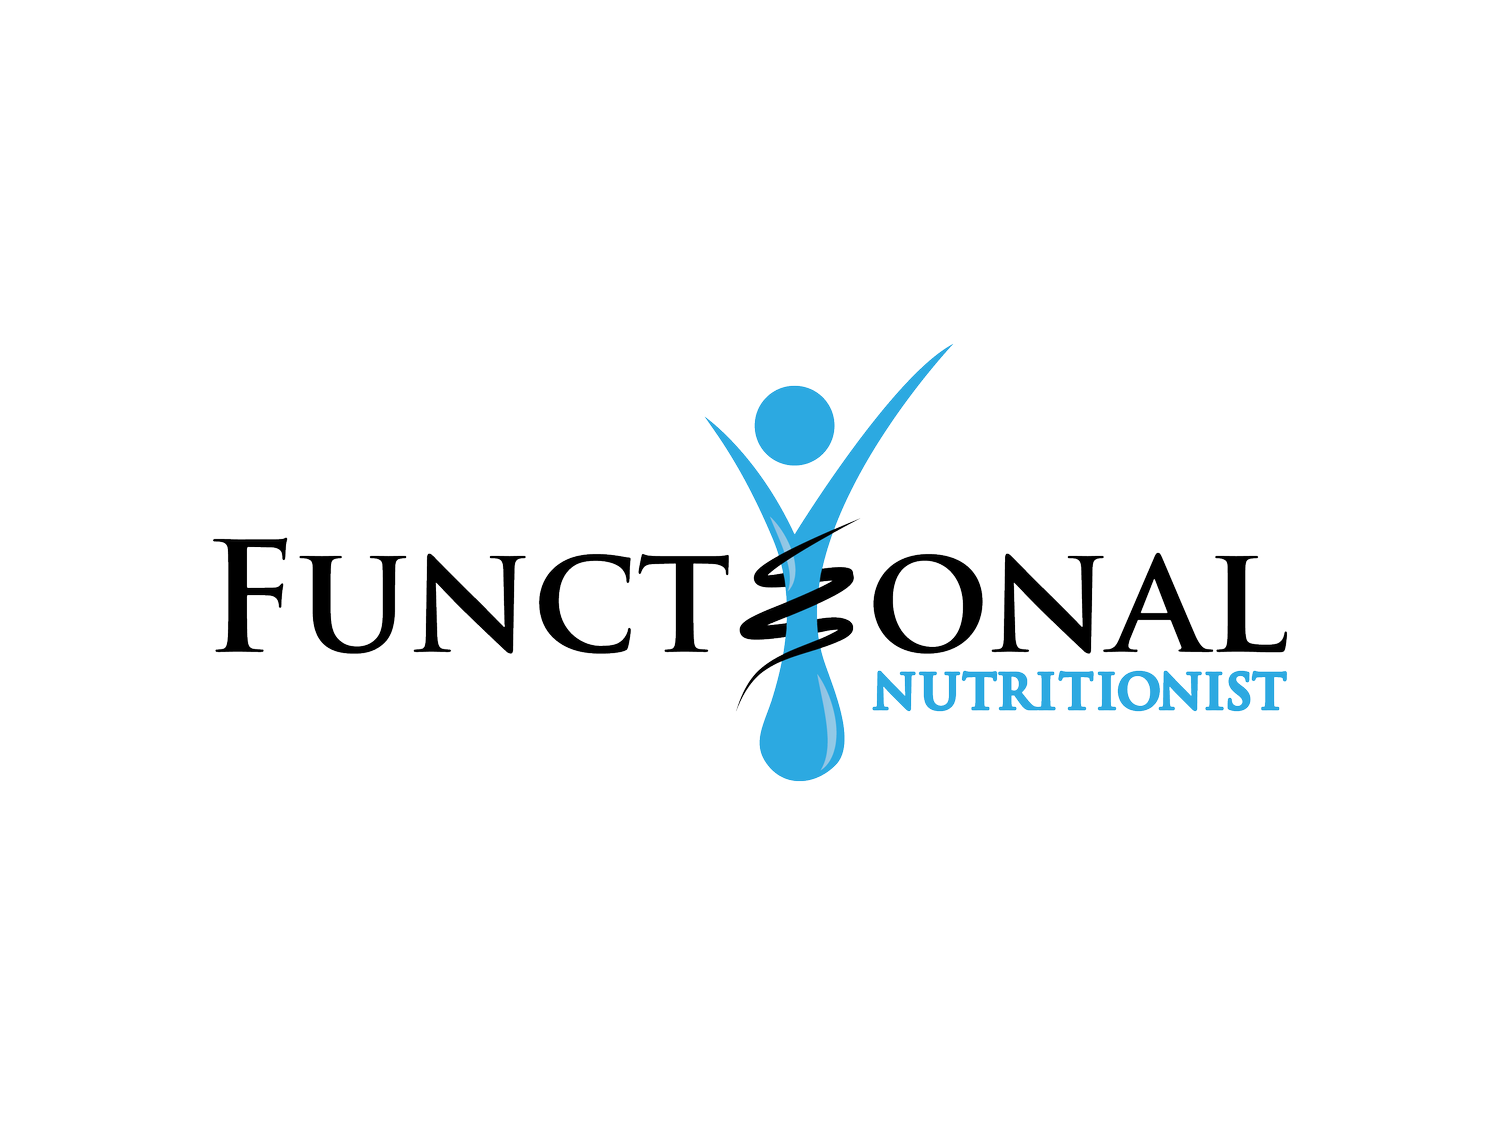 Functional Nutritionist